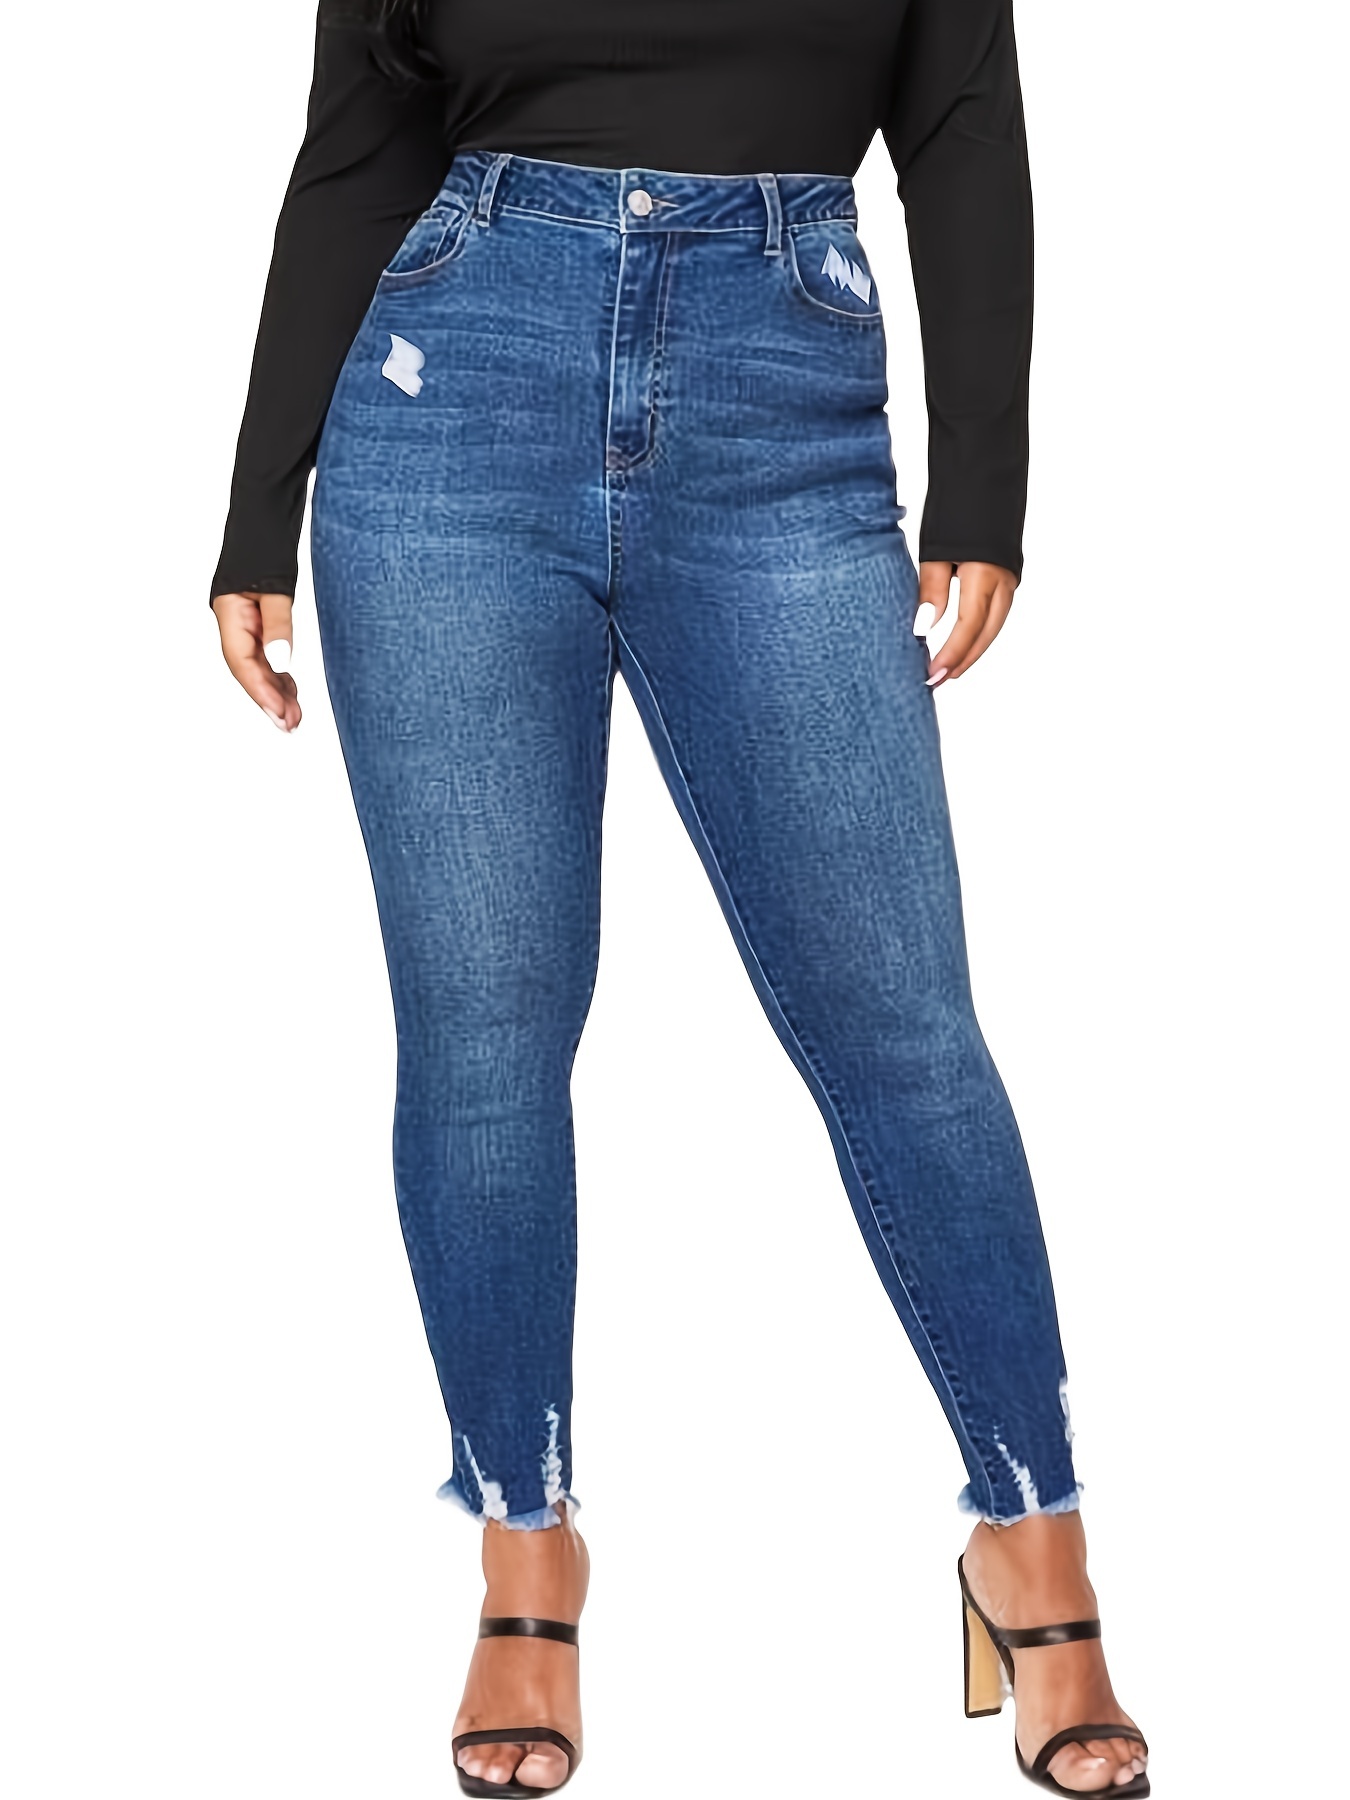 Plus Size High Rise Ripped Carrot Cut Skinny Jeans, Women's Plus